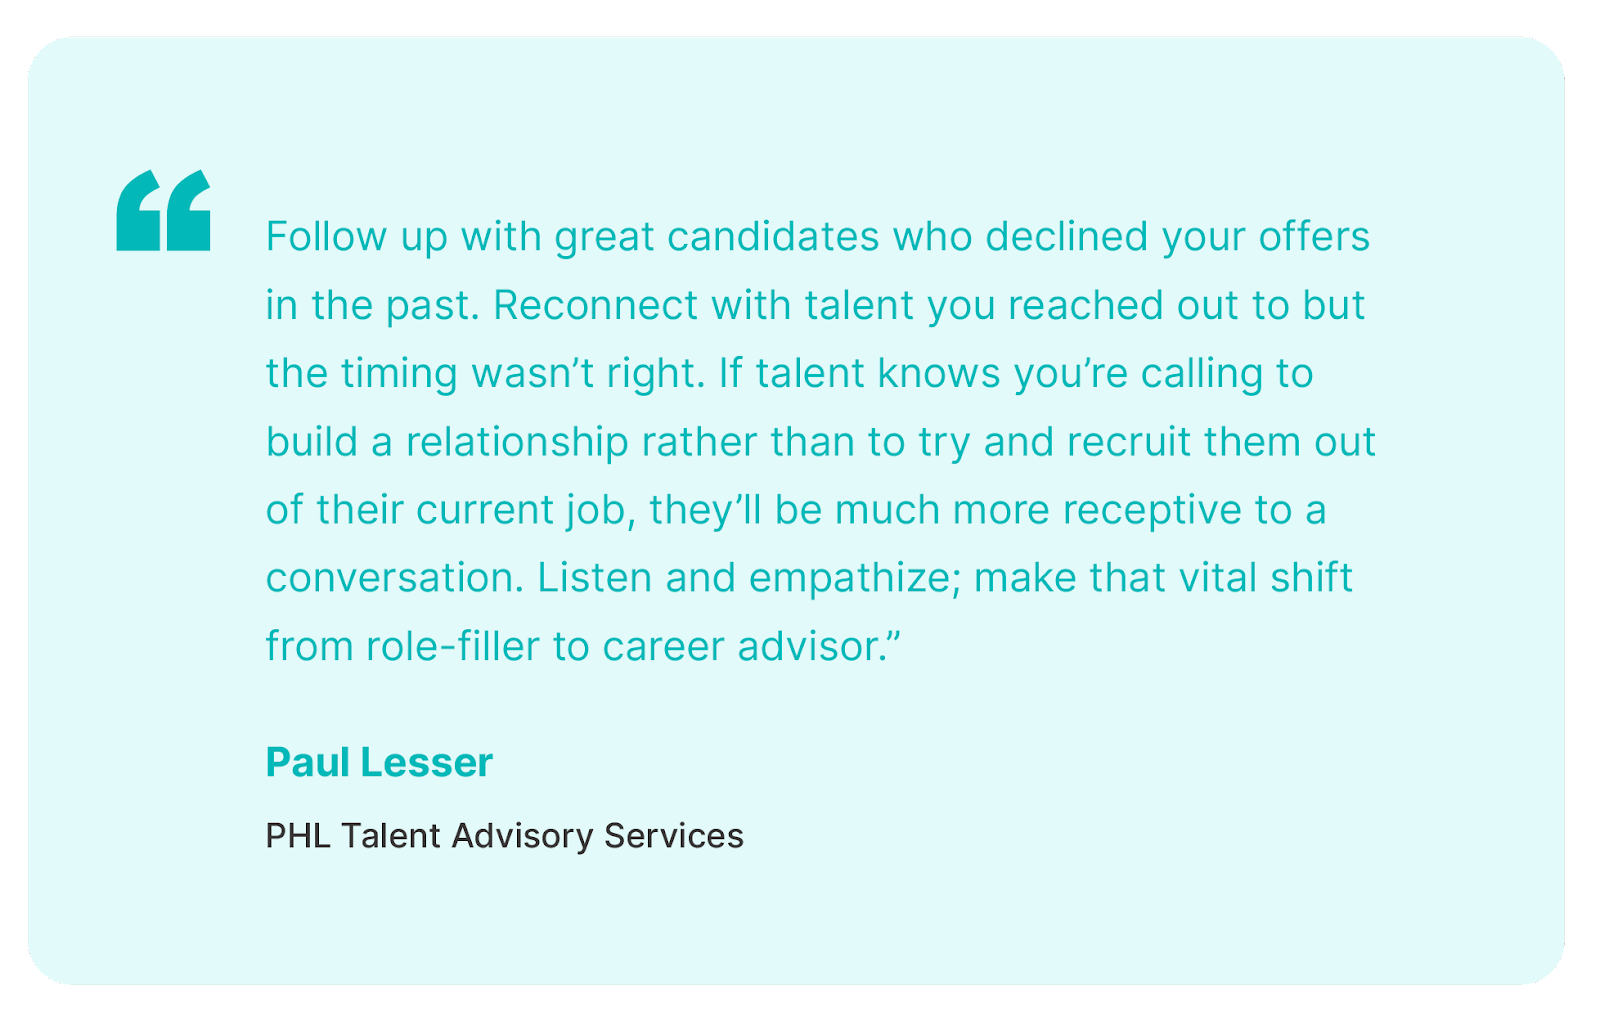 hiring slowdowns follow up with candidates